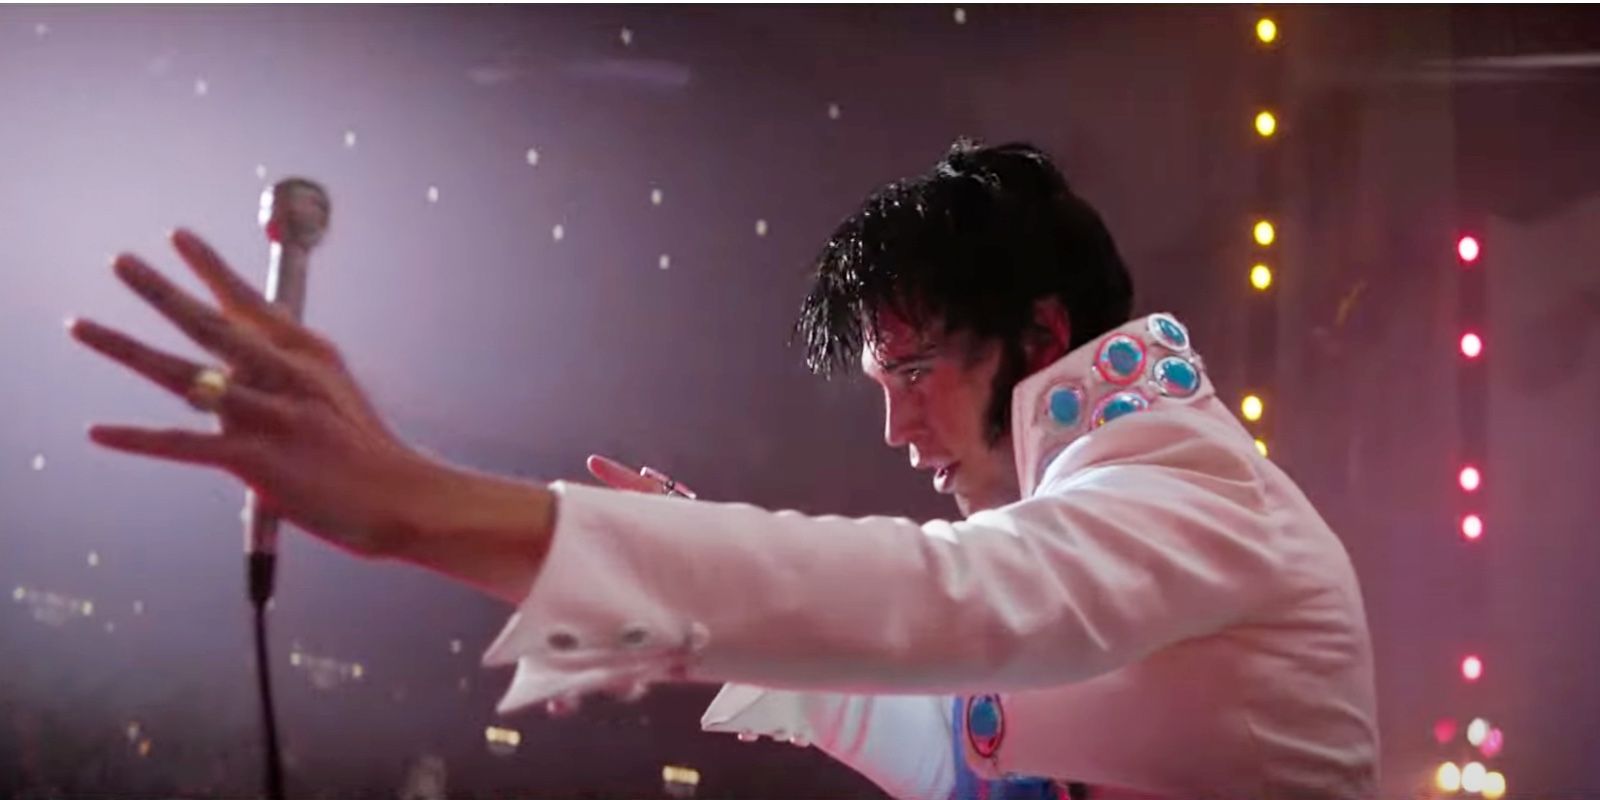 Elvis Movie Trailer Shows Presley’s Rise & Fall as King of Rock & Roll